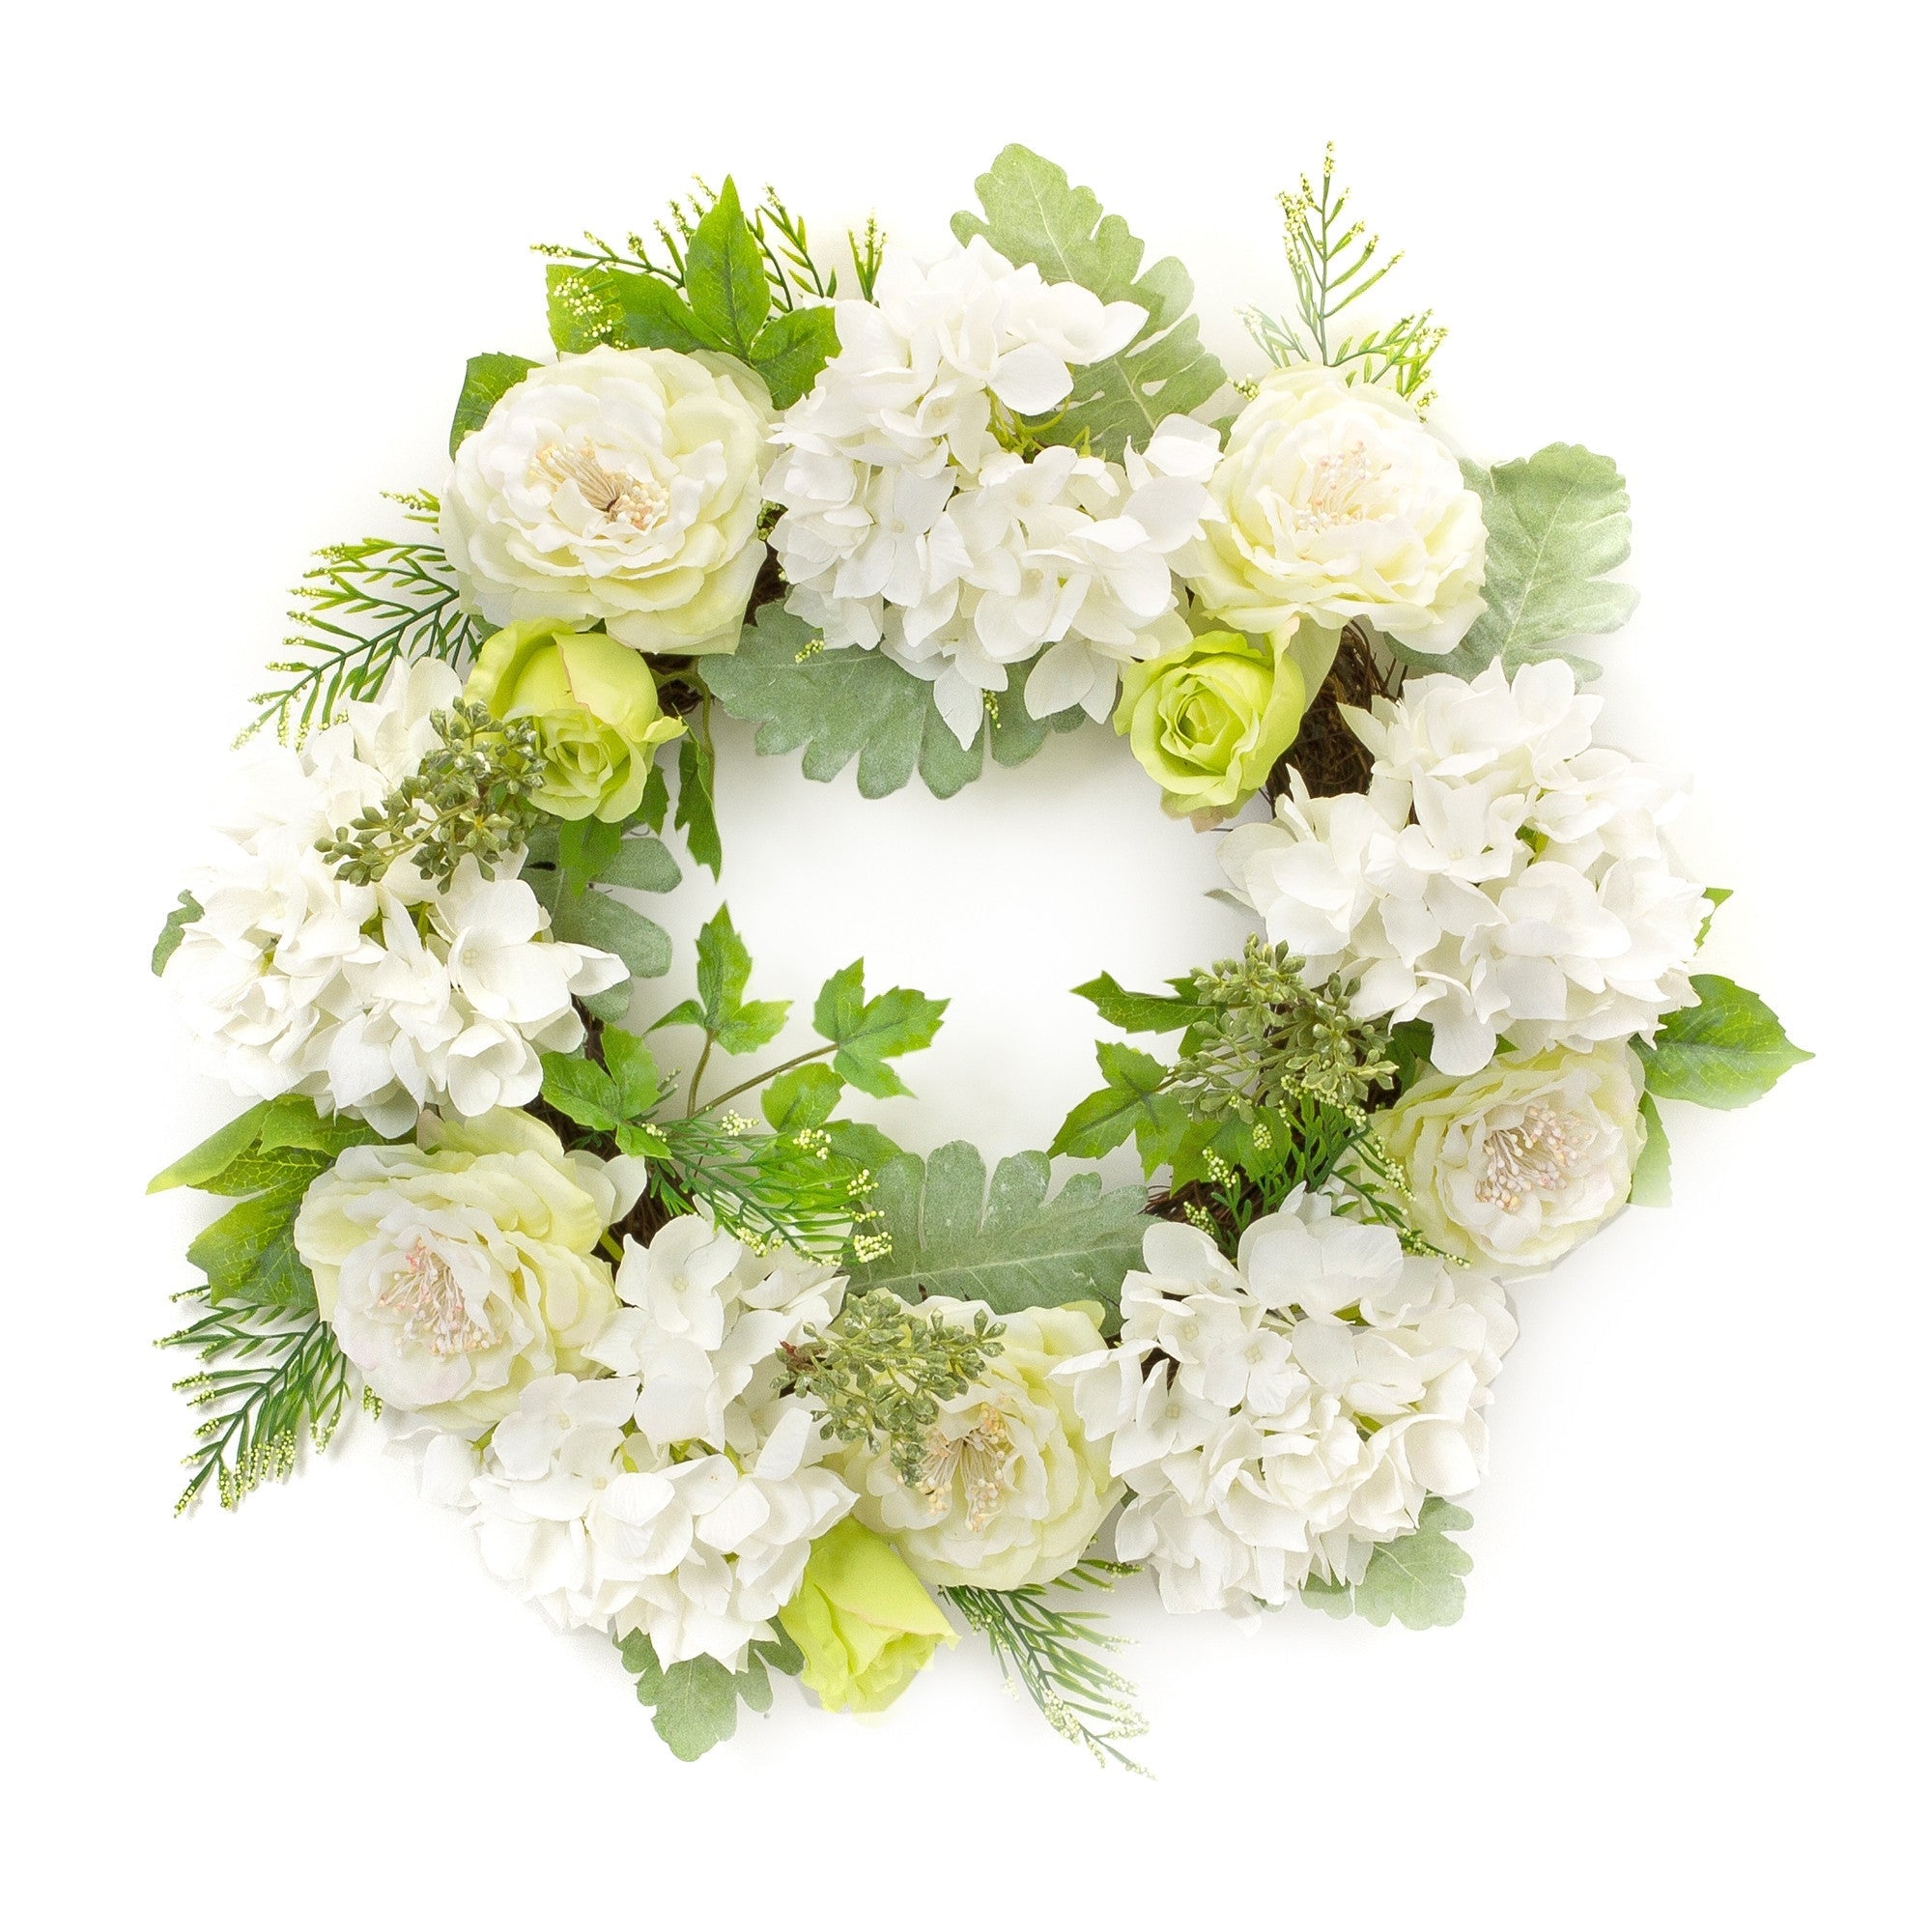 21" Green and White Artificial Mixed Assortment Wreath - Tuesday Morning-Wreaths